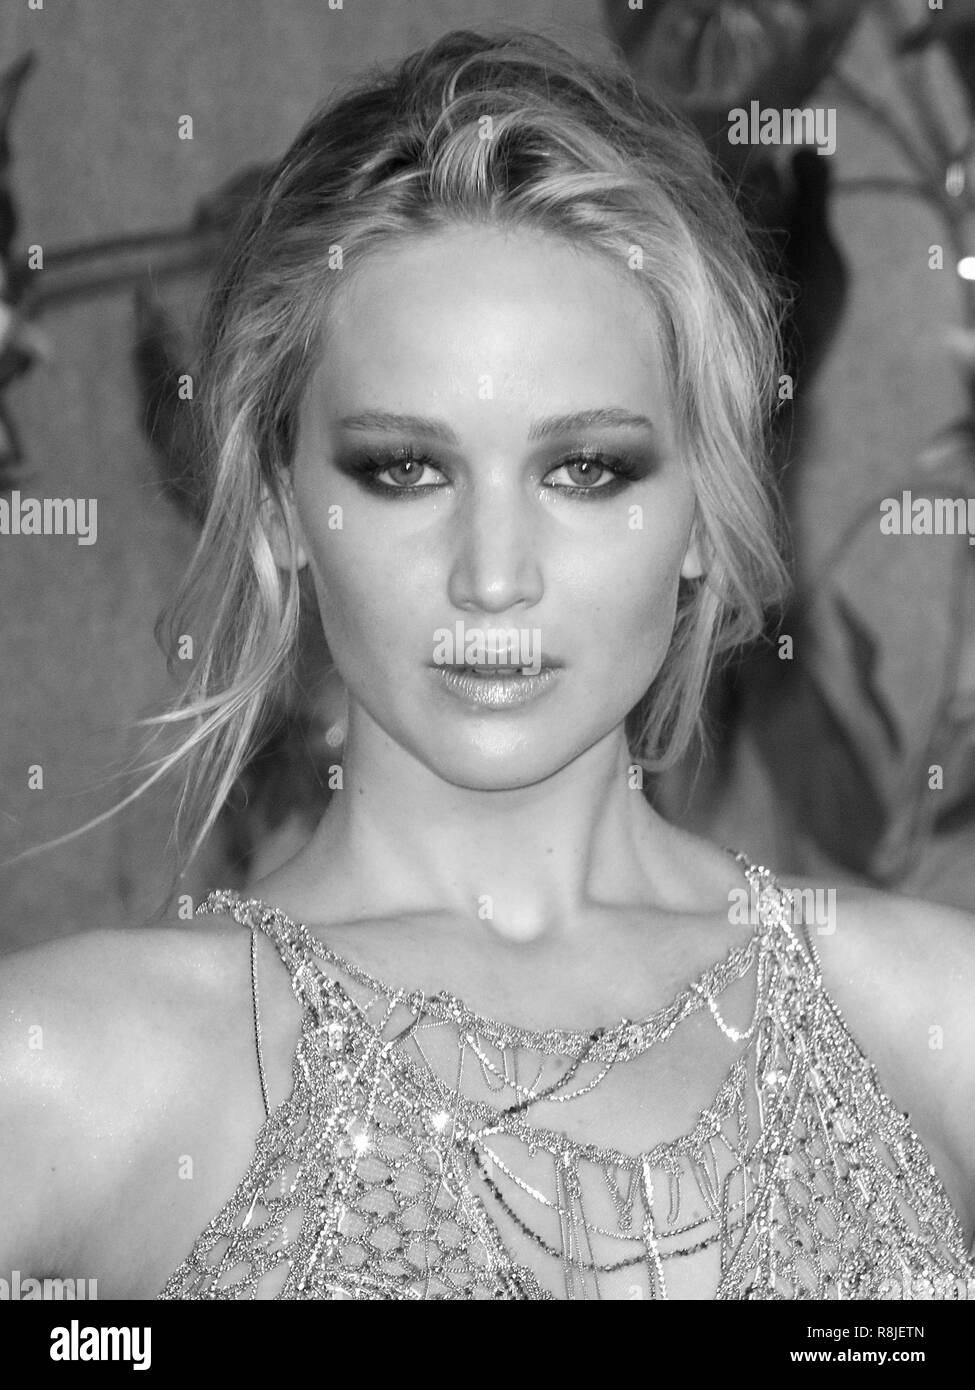 LONDON - SEP 06, 2017: Jennifer Lawrence attends the Mother UK film premiere at Odeon Leicester Square in London( Image digitally altered to monochrome ) Stock Photo